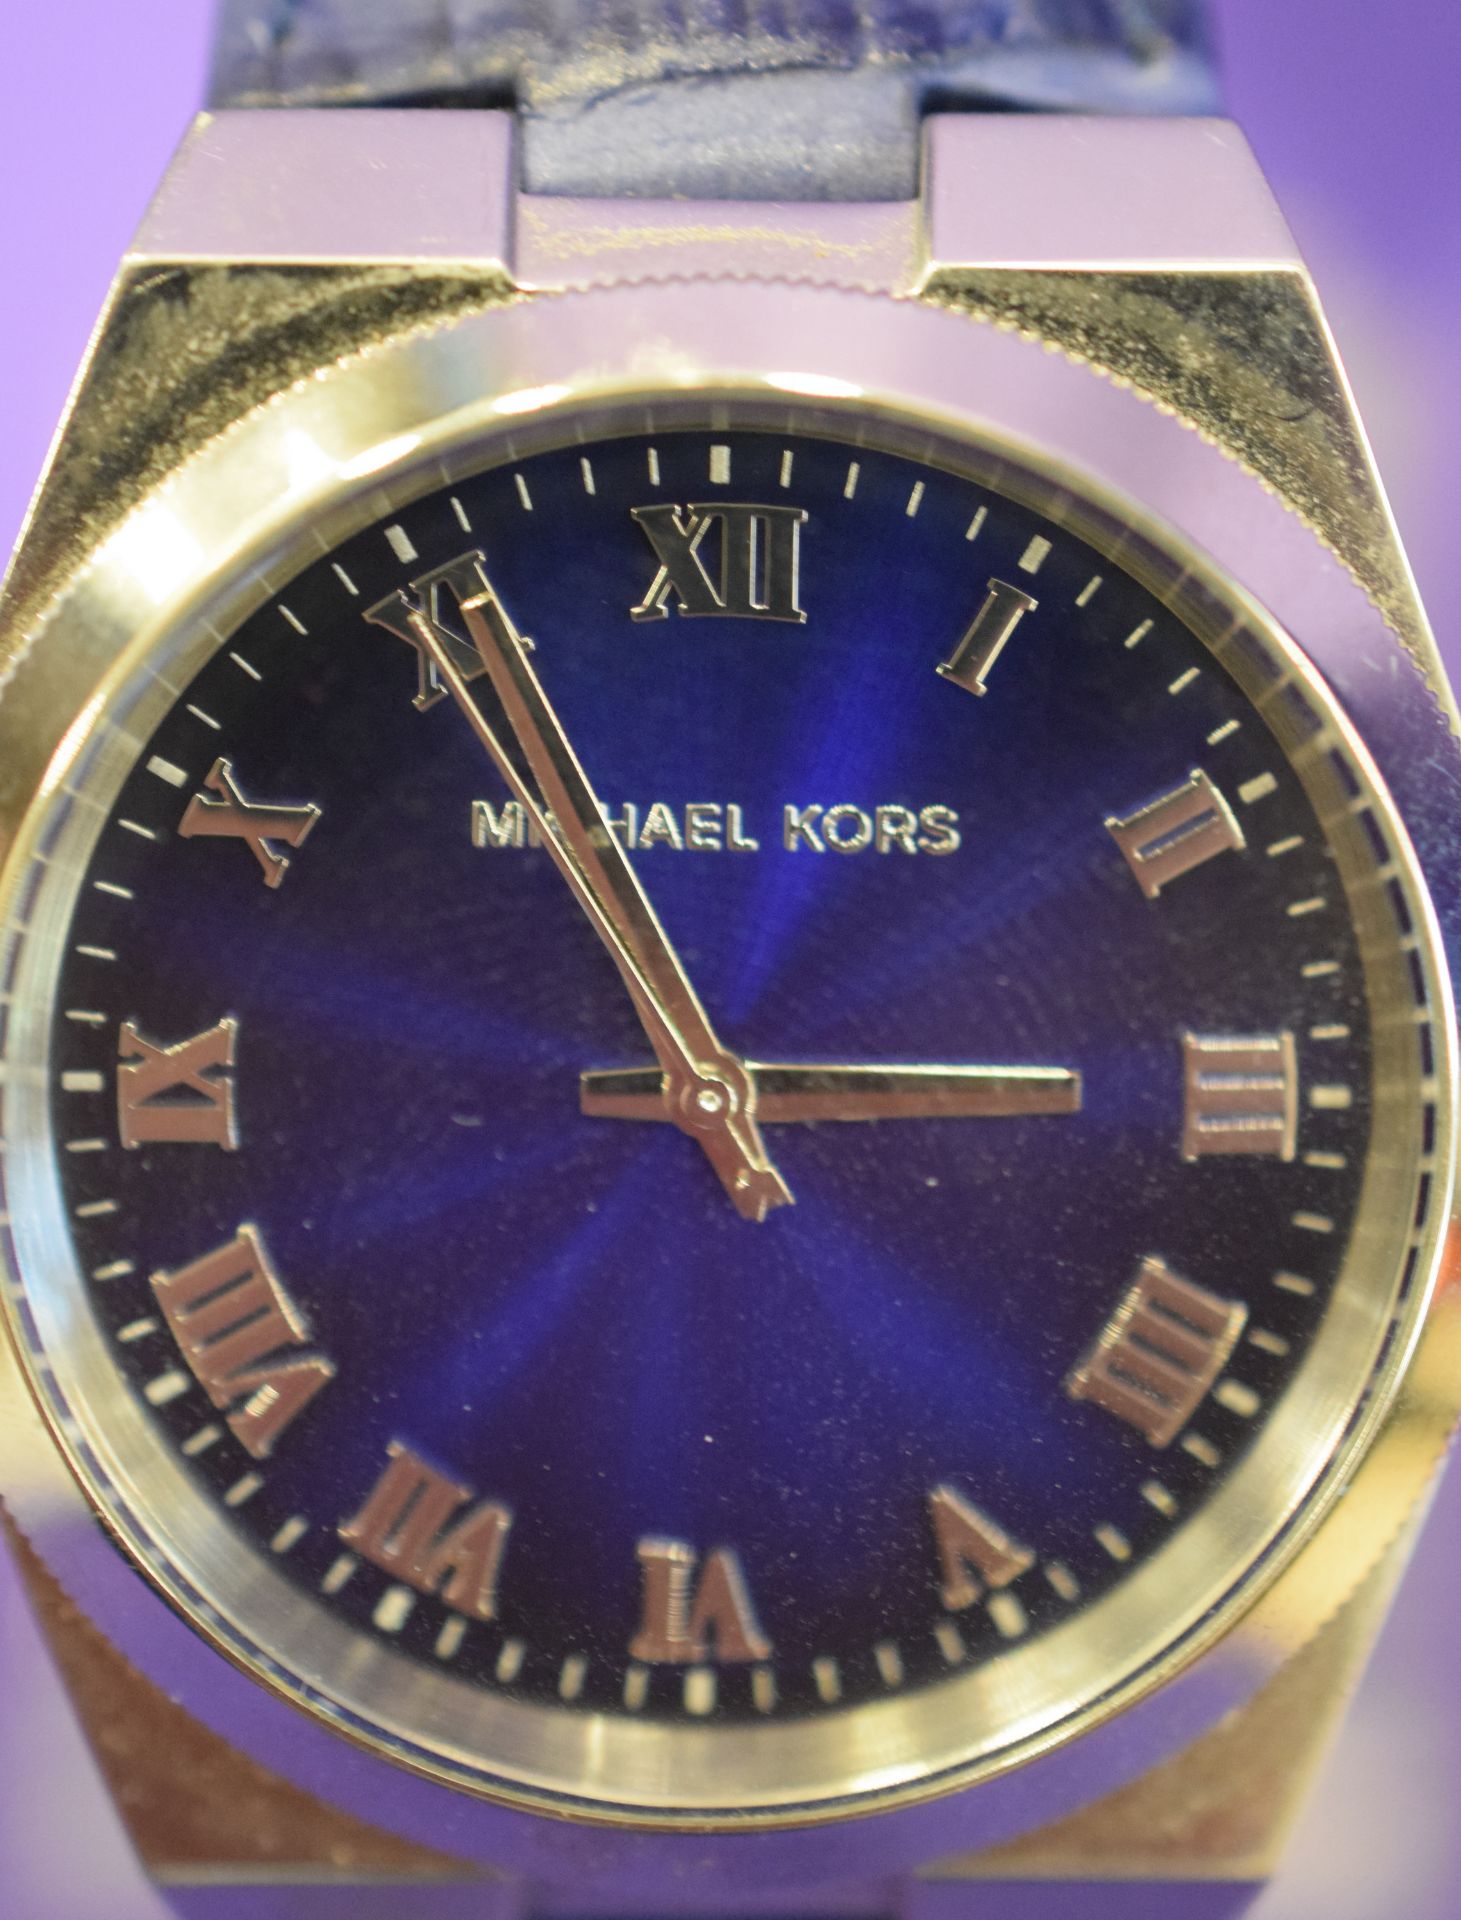 Michael Kors Blue Dial Watch On Blue Strap - Image 5 of 5